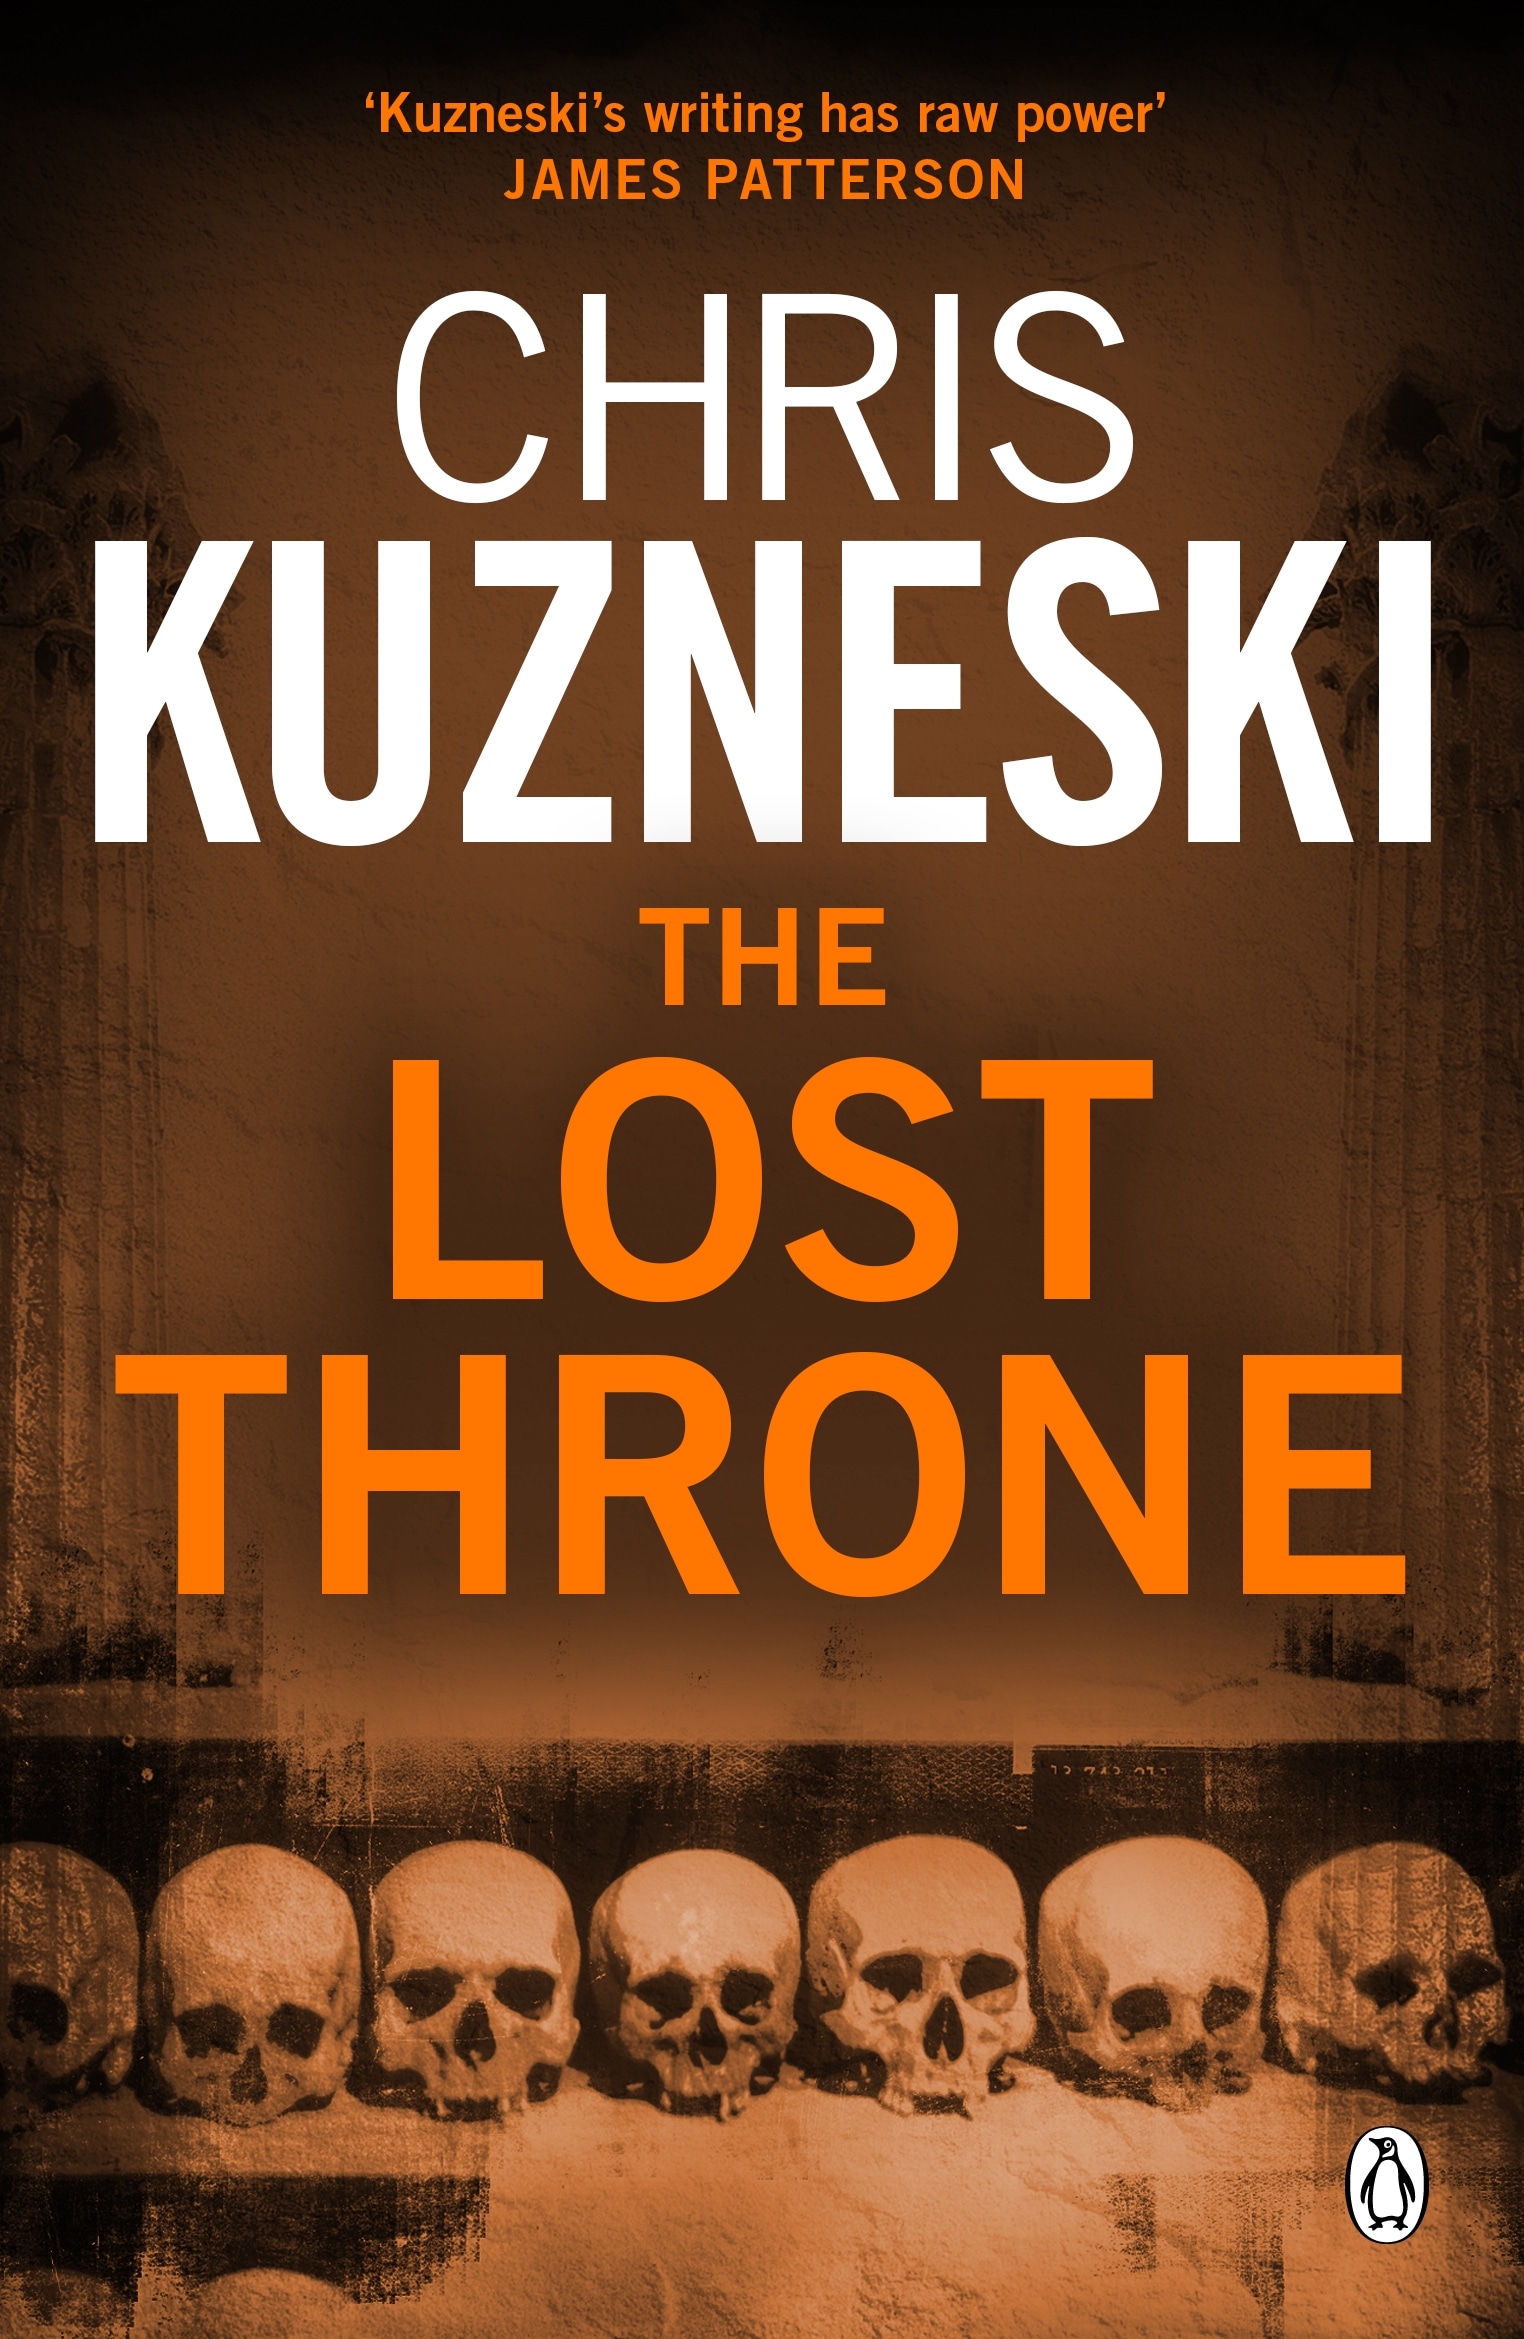 Book “The Lost Throne” by Chris Kuzneski — August 27, 2020